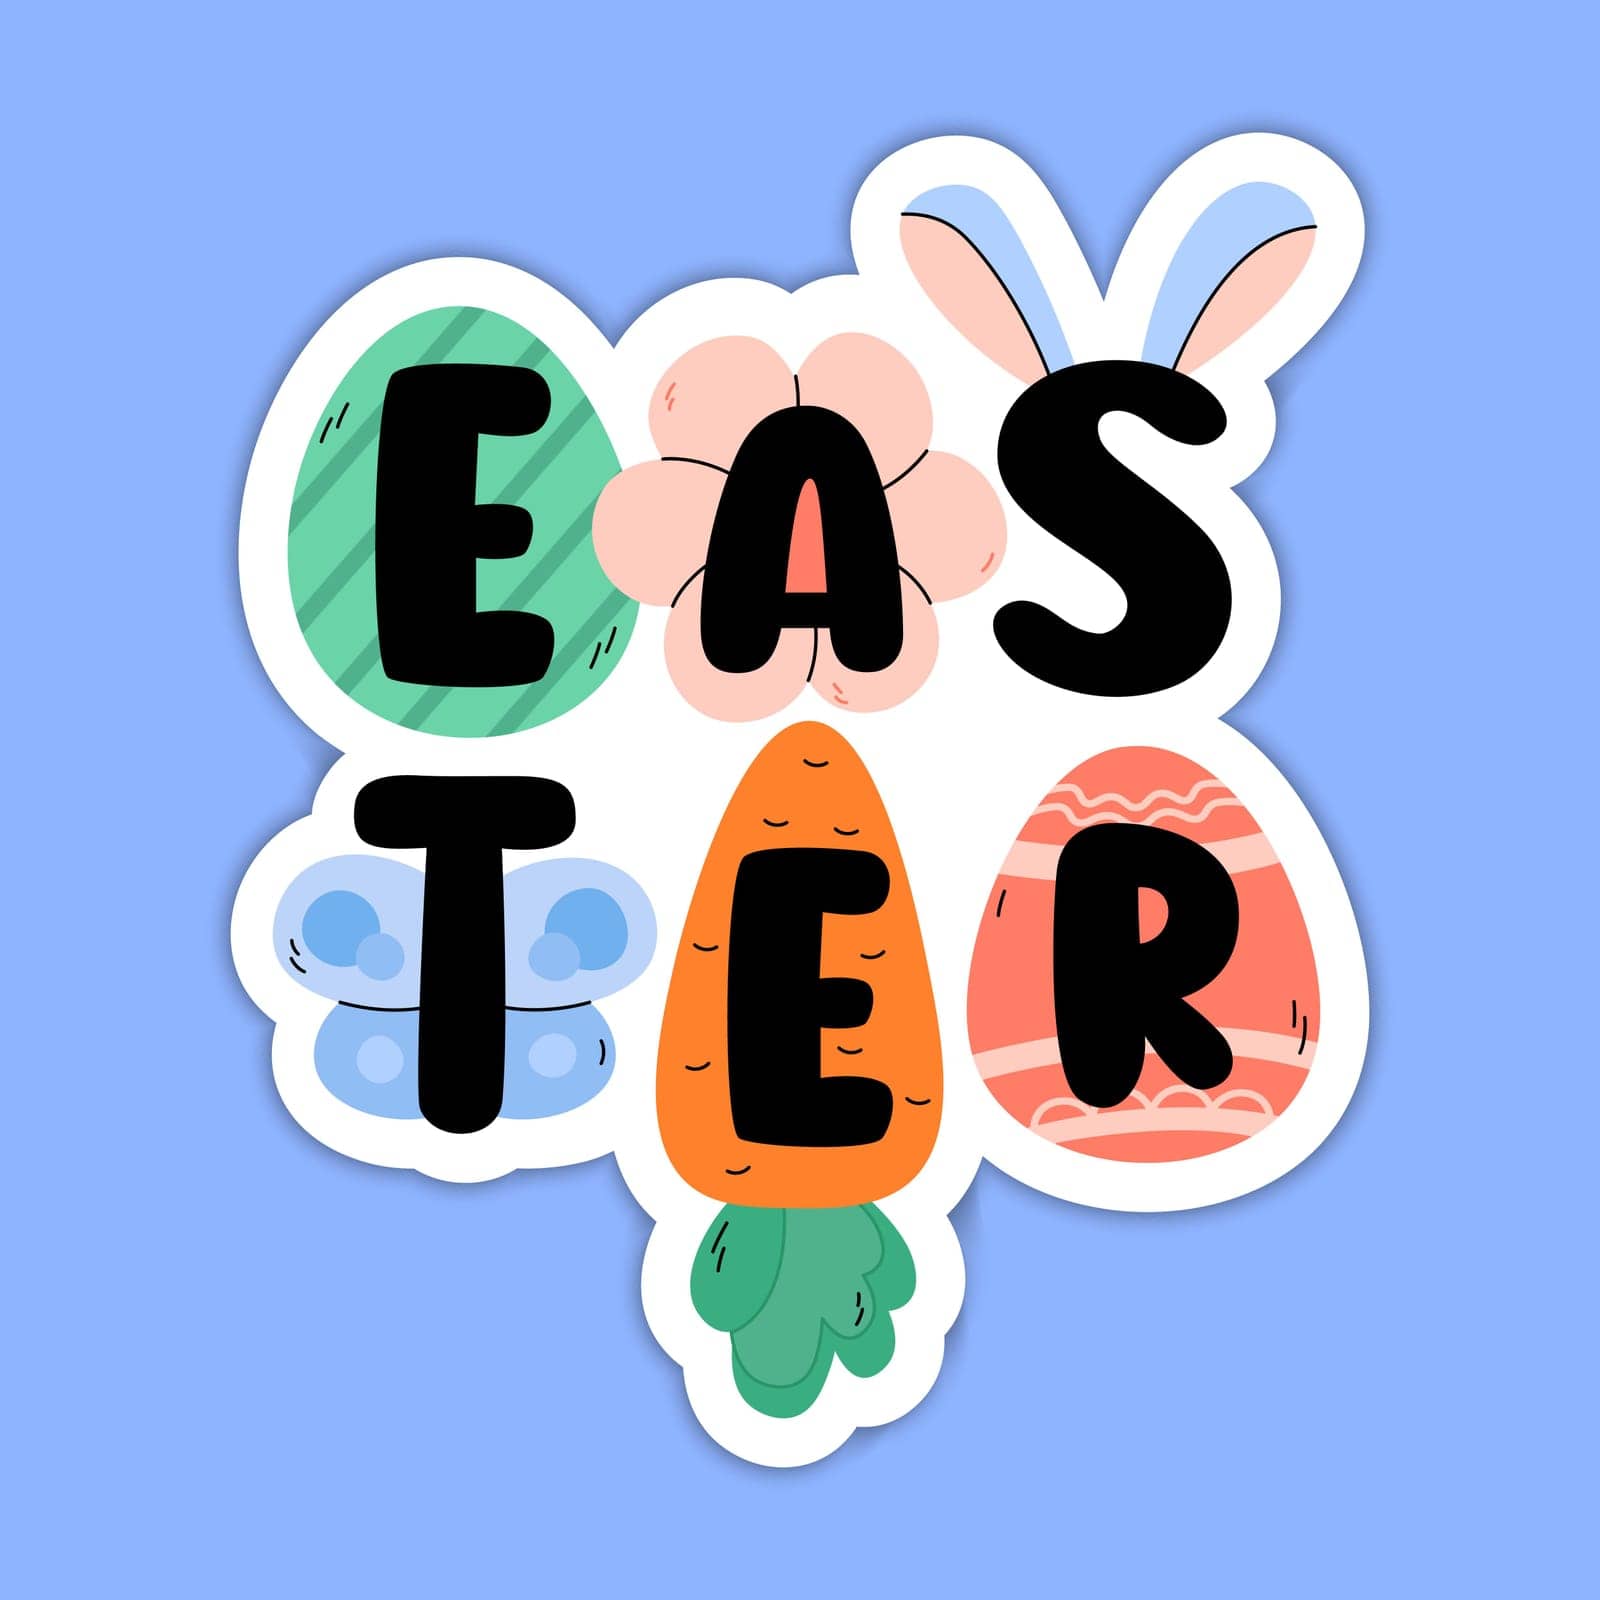 Easter cute cartoon vector illustration. Easter print colorful for greeting cards, posters, web banners, stickers. Doodle elements eggs, flower, bunny, carrot.